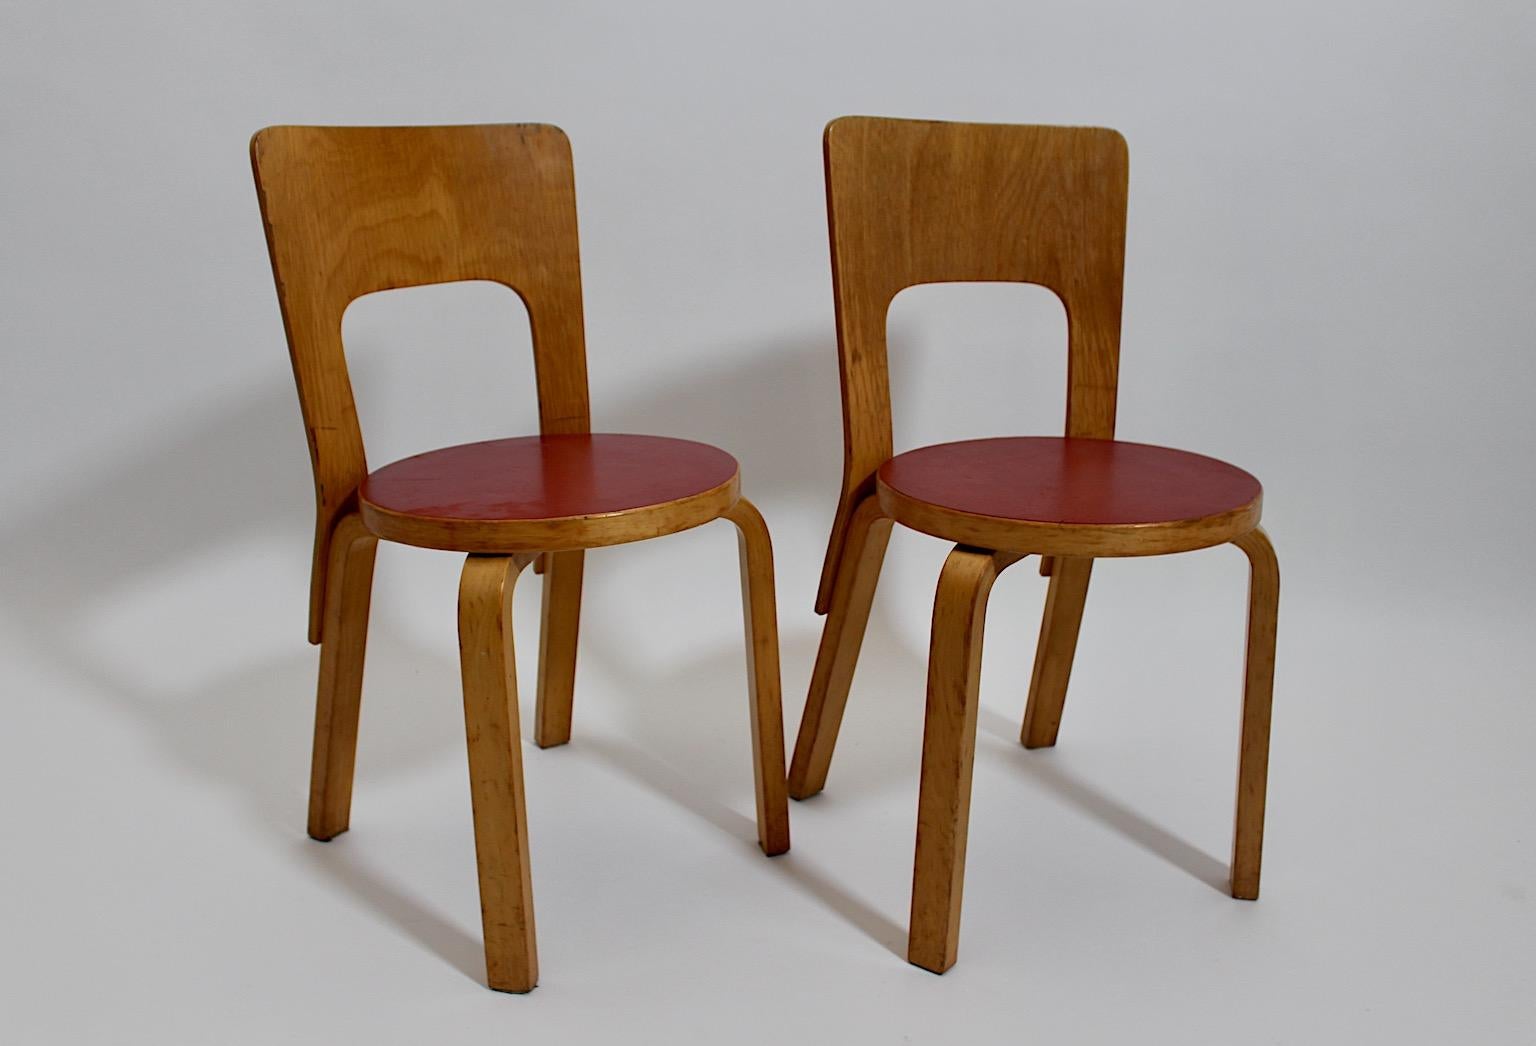 Alvar Aalto Scandinavian modern vintage authentic duo pair model 66 from lacquered birch and red laminate 1930s, Finland.
An early model chair 66 by Alvar Aalto for Artek with great minimalistic design from birch in a beautiful warm brown tone and